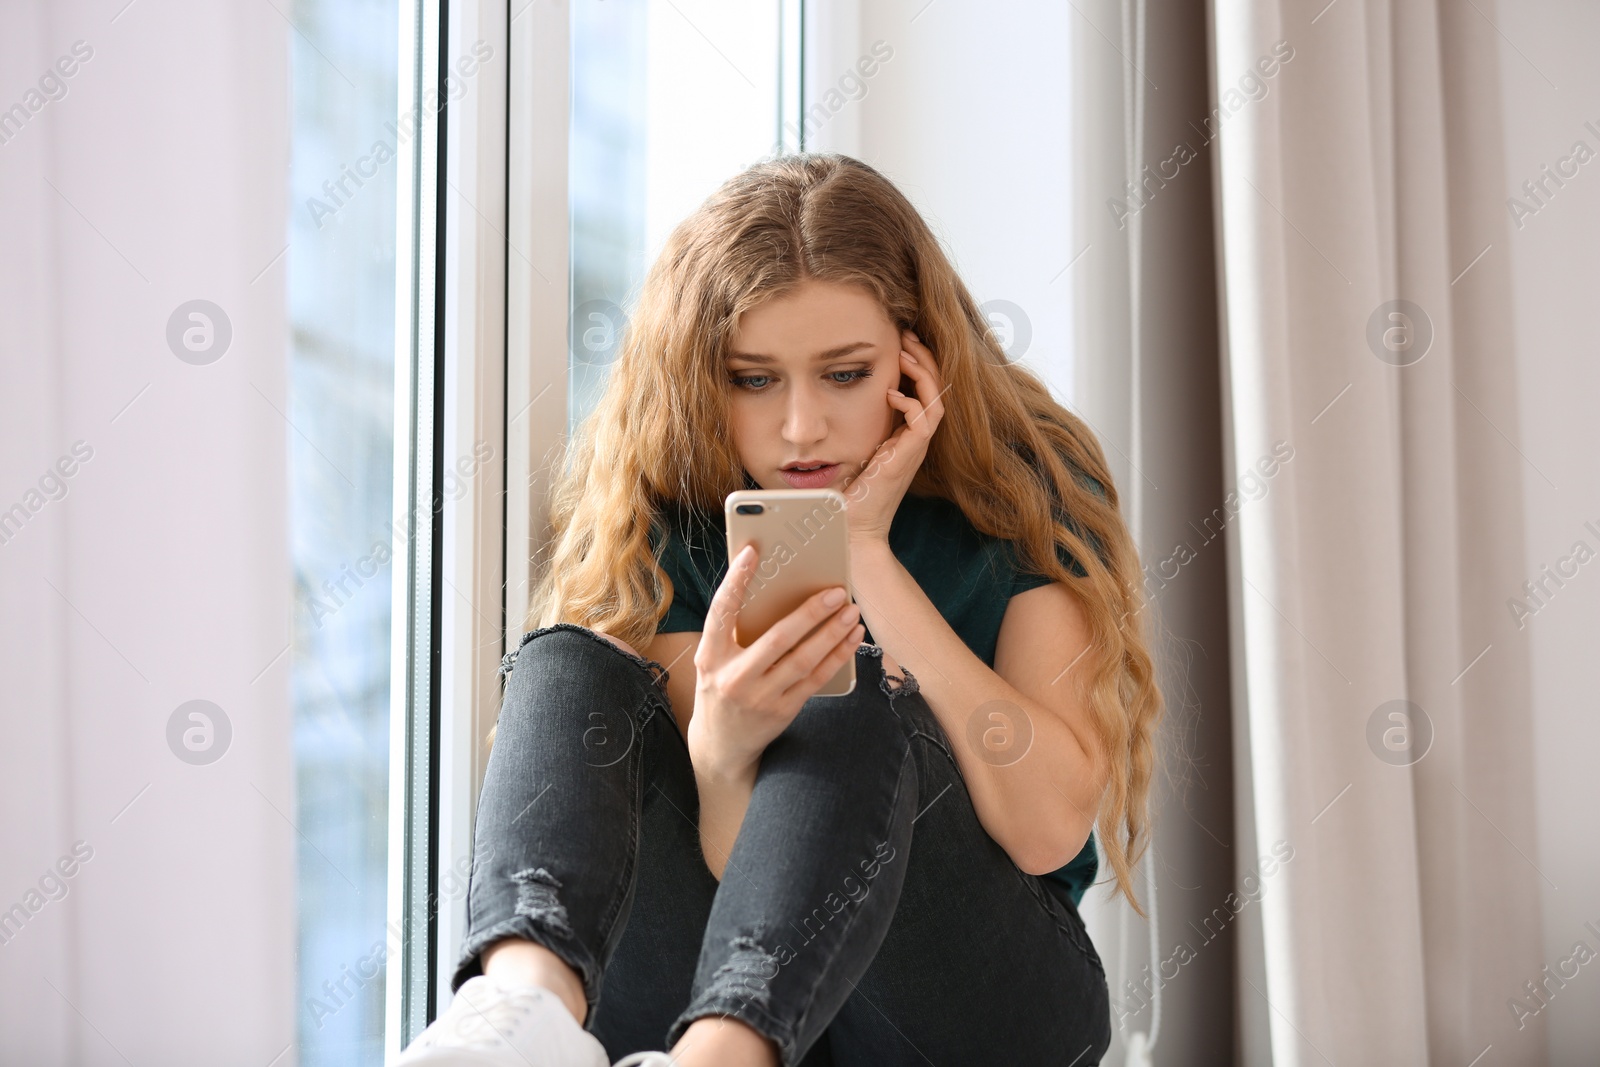 Photo of Upset woman with smartphone sitting on window sill indoors. Loneliness concept